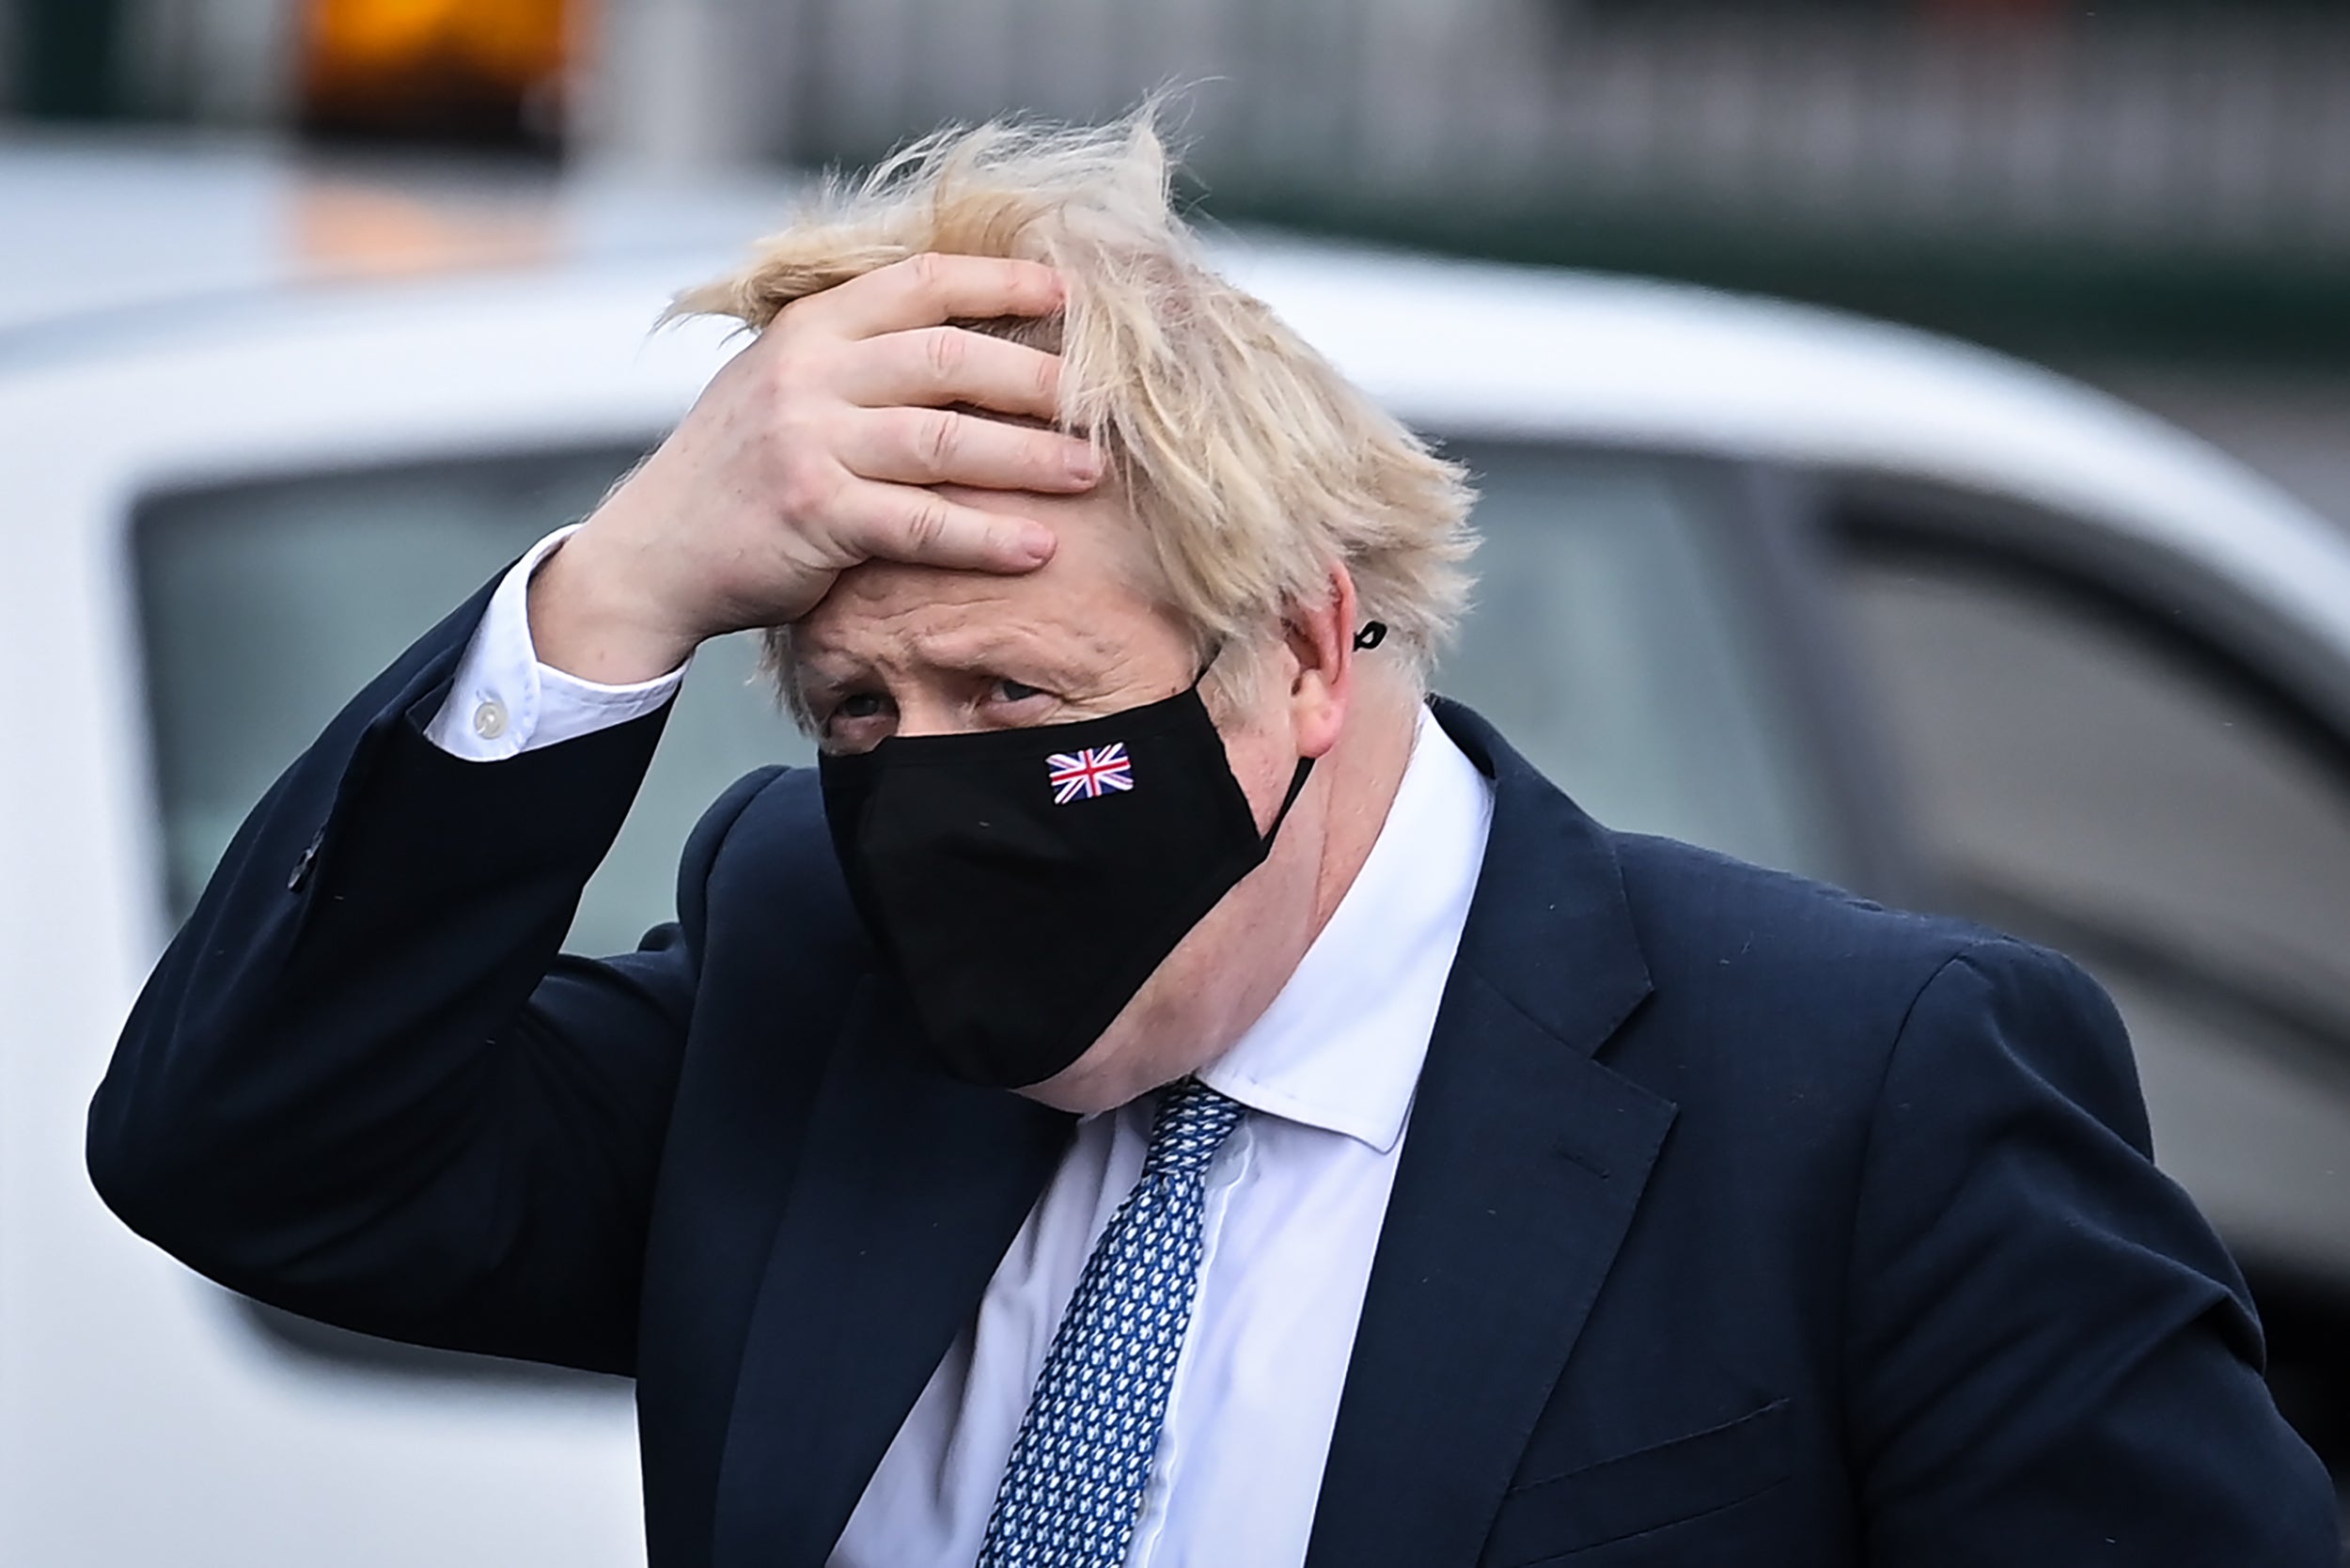 Boris Johnson was slammed by his former advisers for his chaotic handling of the pandemic